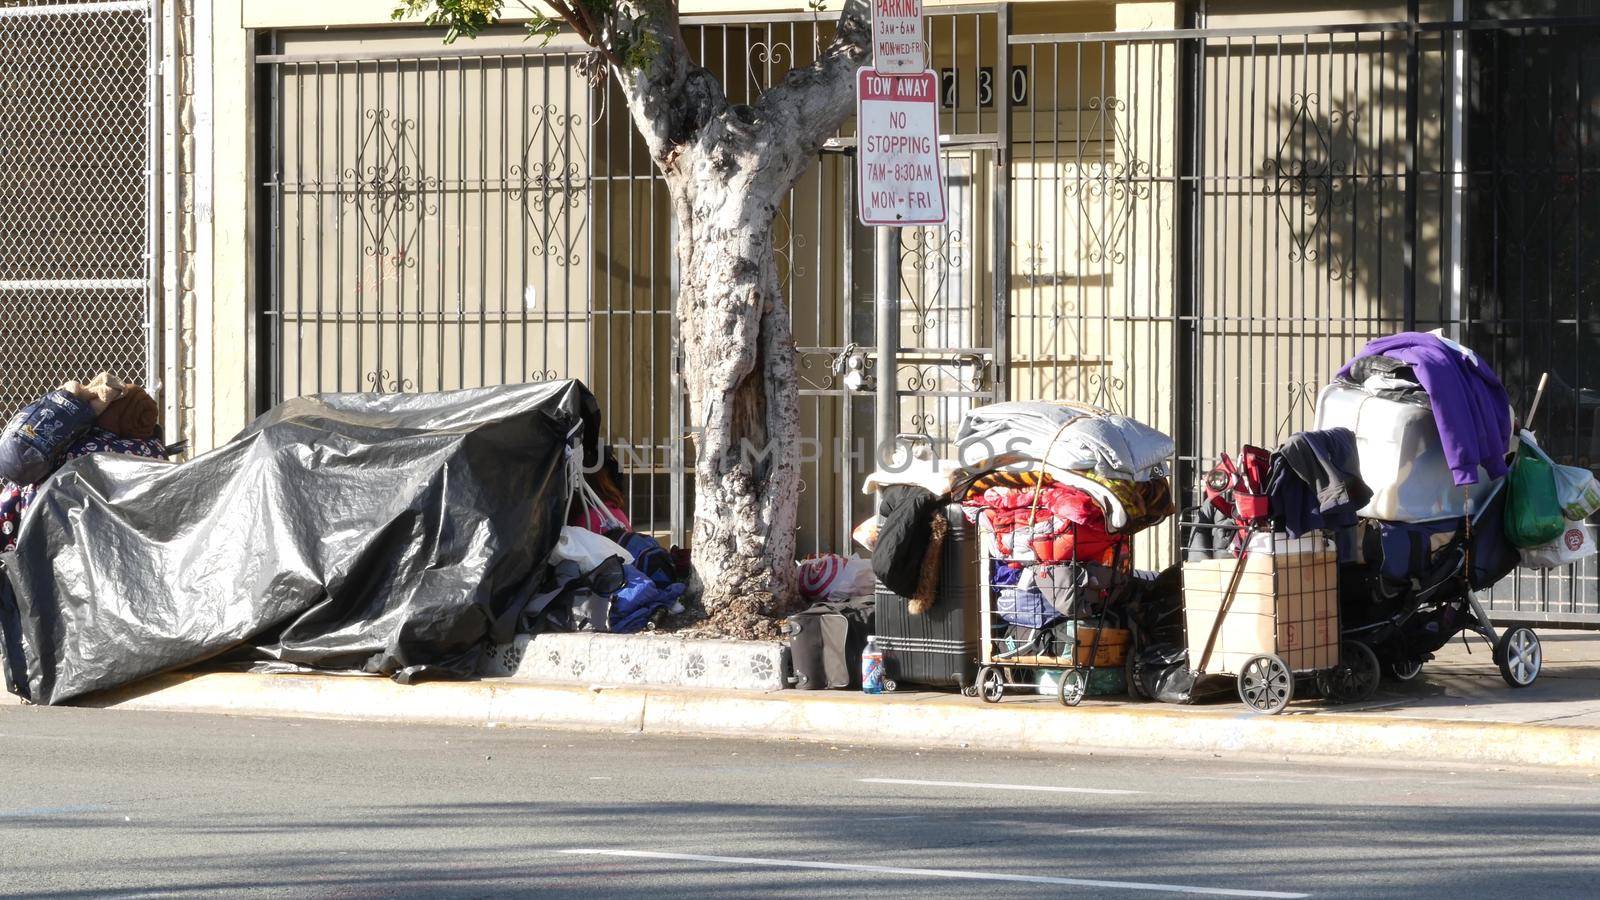 SAN DIEGO, CALIFORNIA USA - 4 JAN 2020: Stuff of homeless street people on walkway, truck on roadside. Begging problem in downtown of city near Los Angeles. Jobless beggars live on pavements by DogoraSun